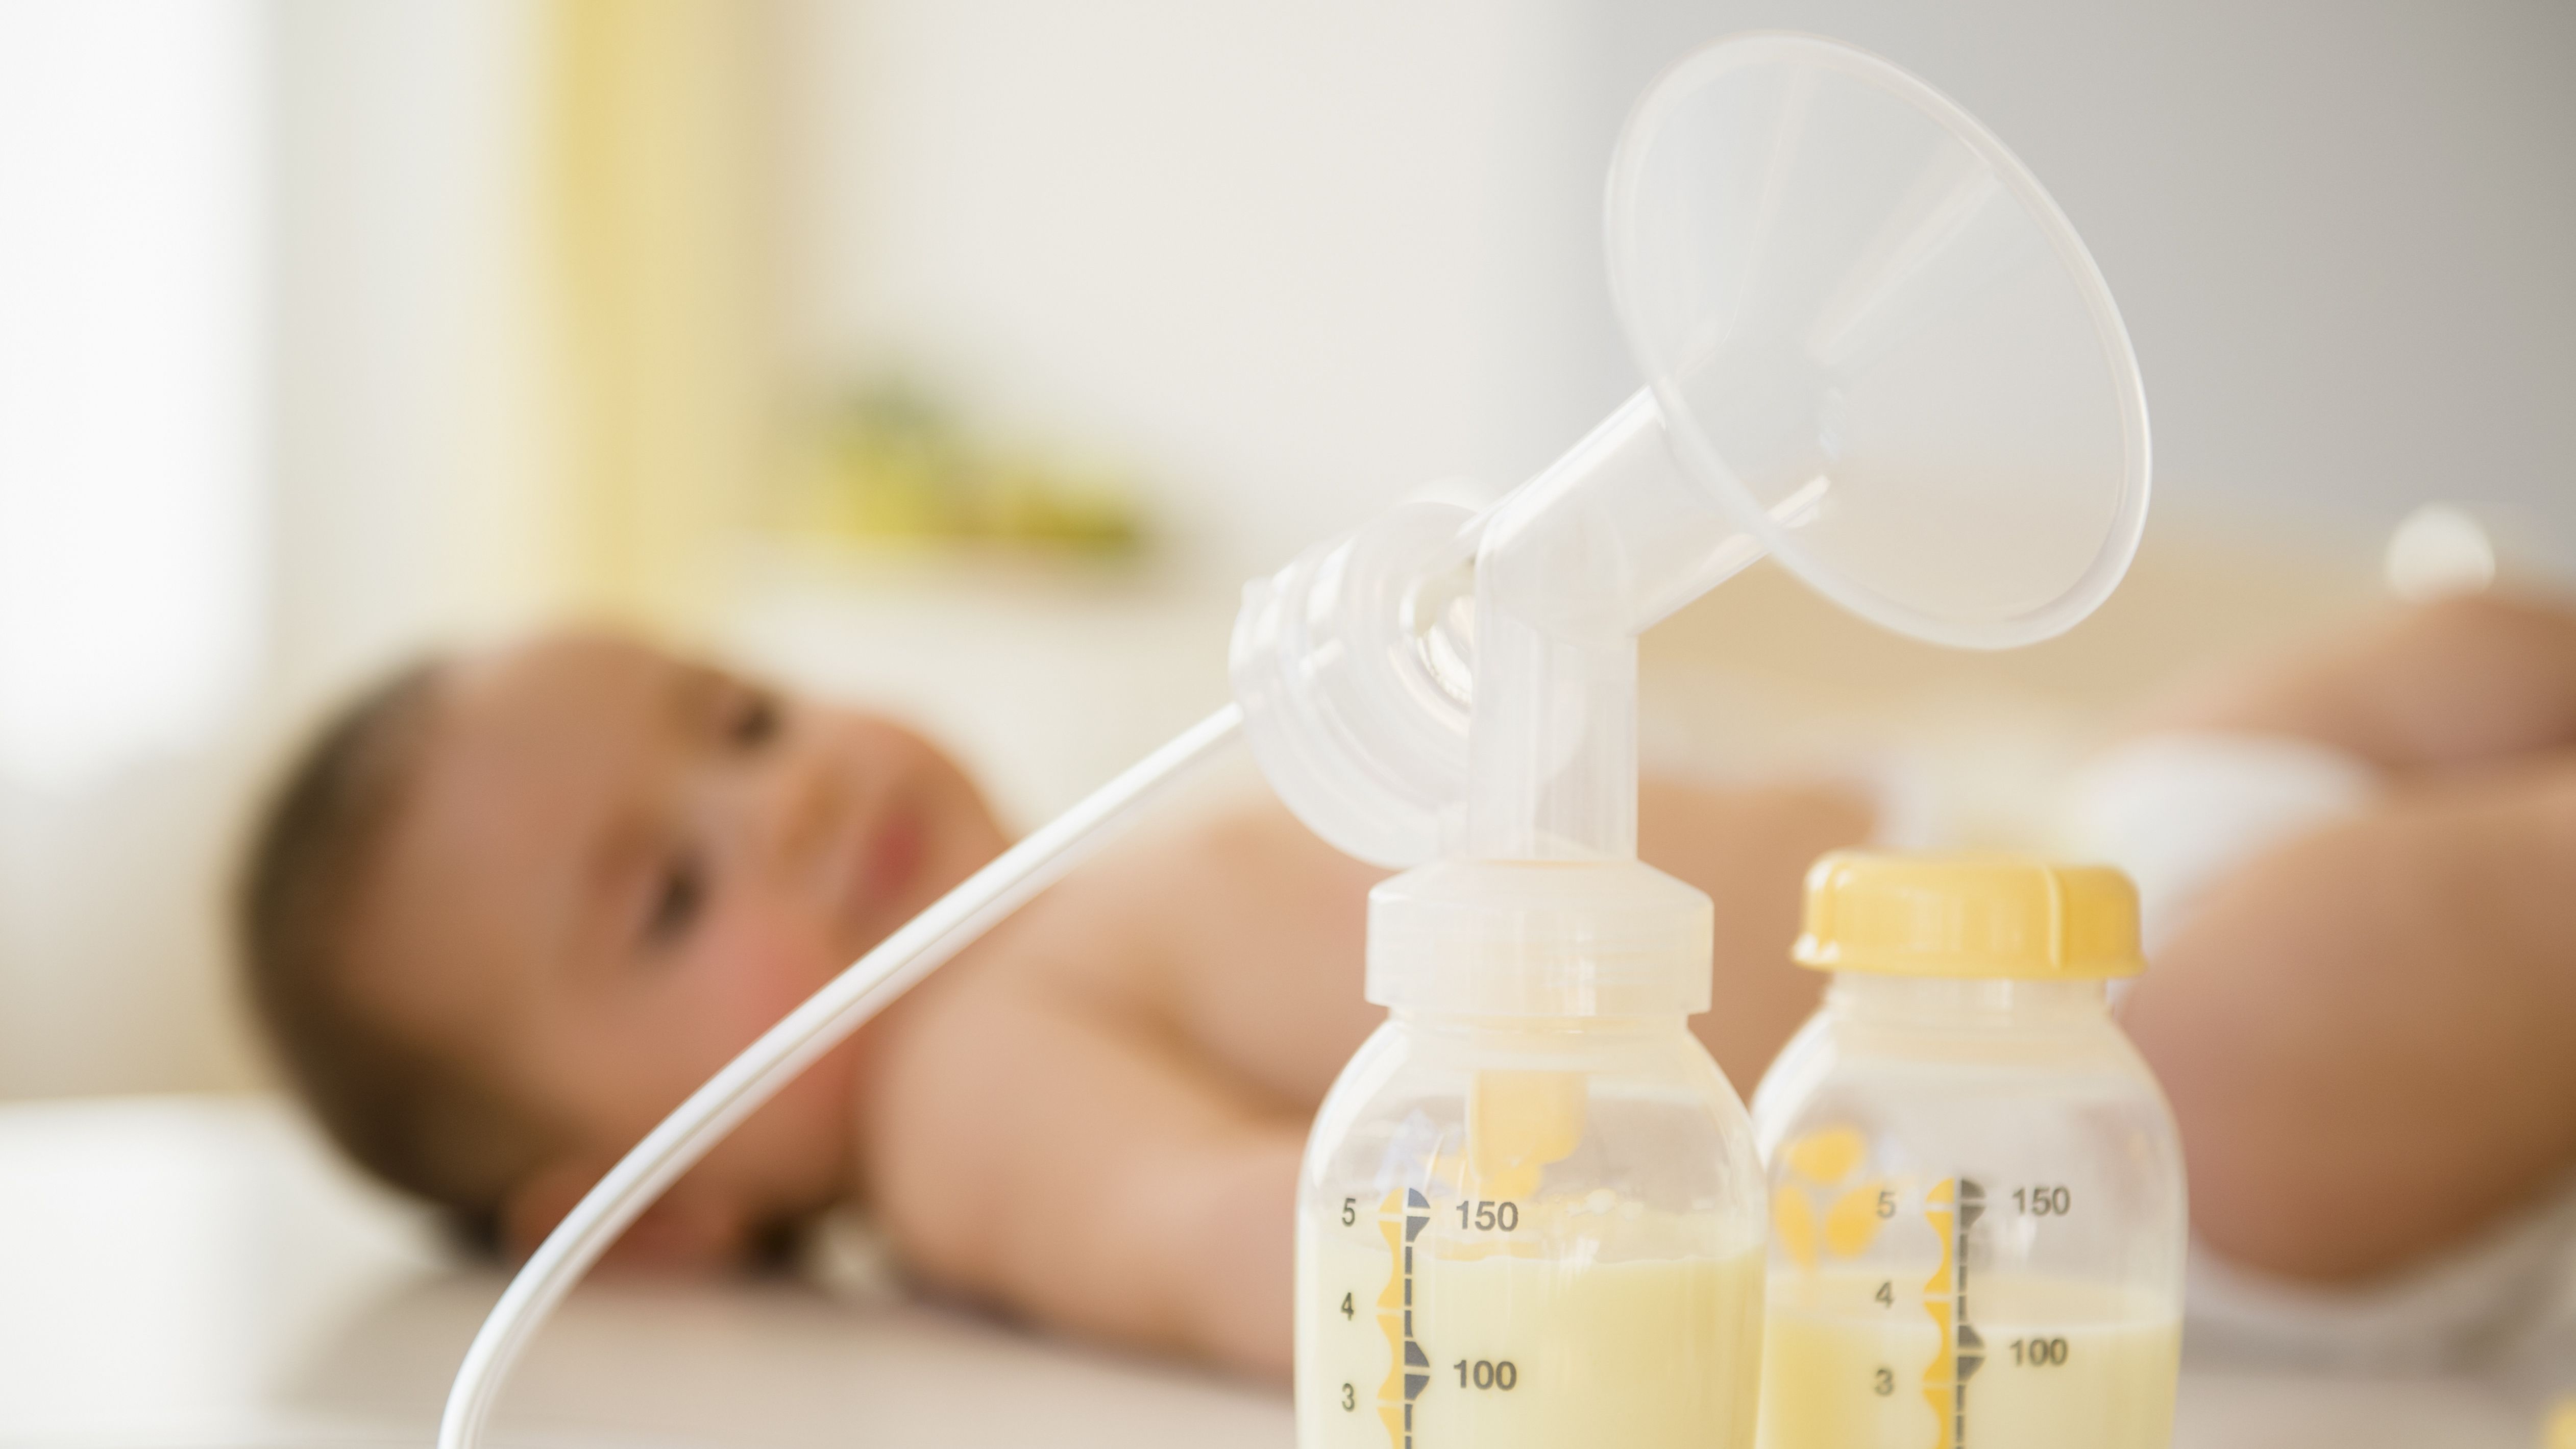 A Guide on How to Get a Free Breast Pump Through Insurance